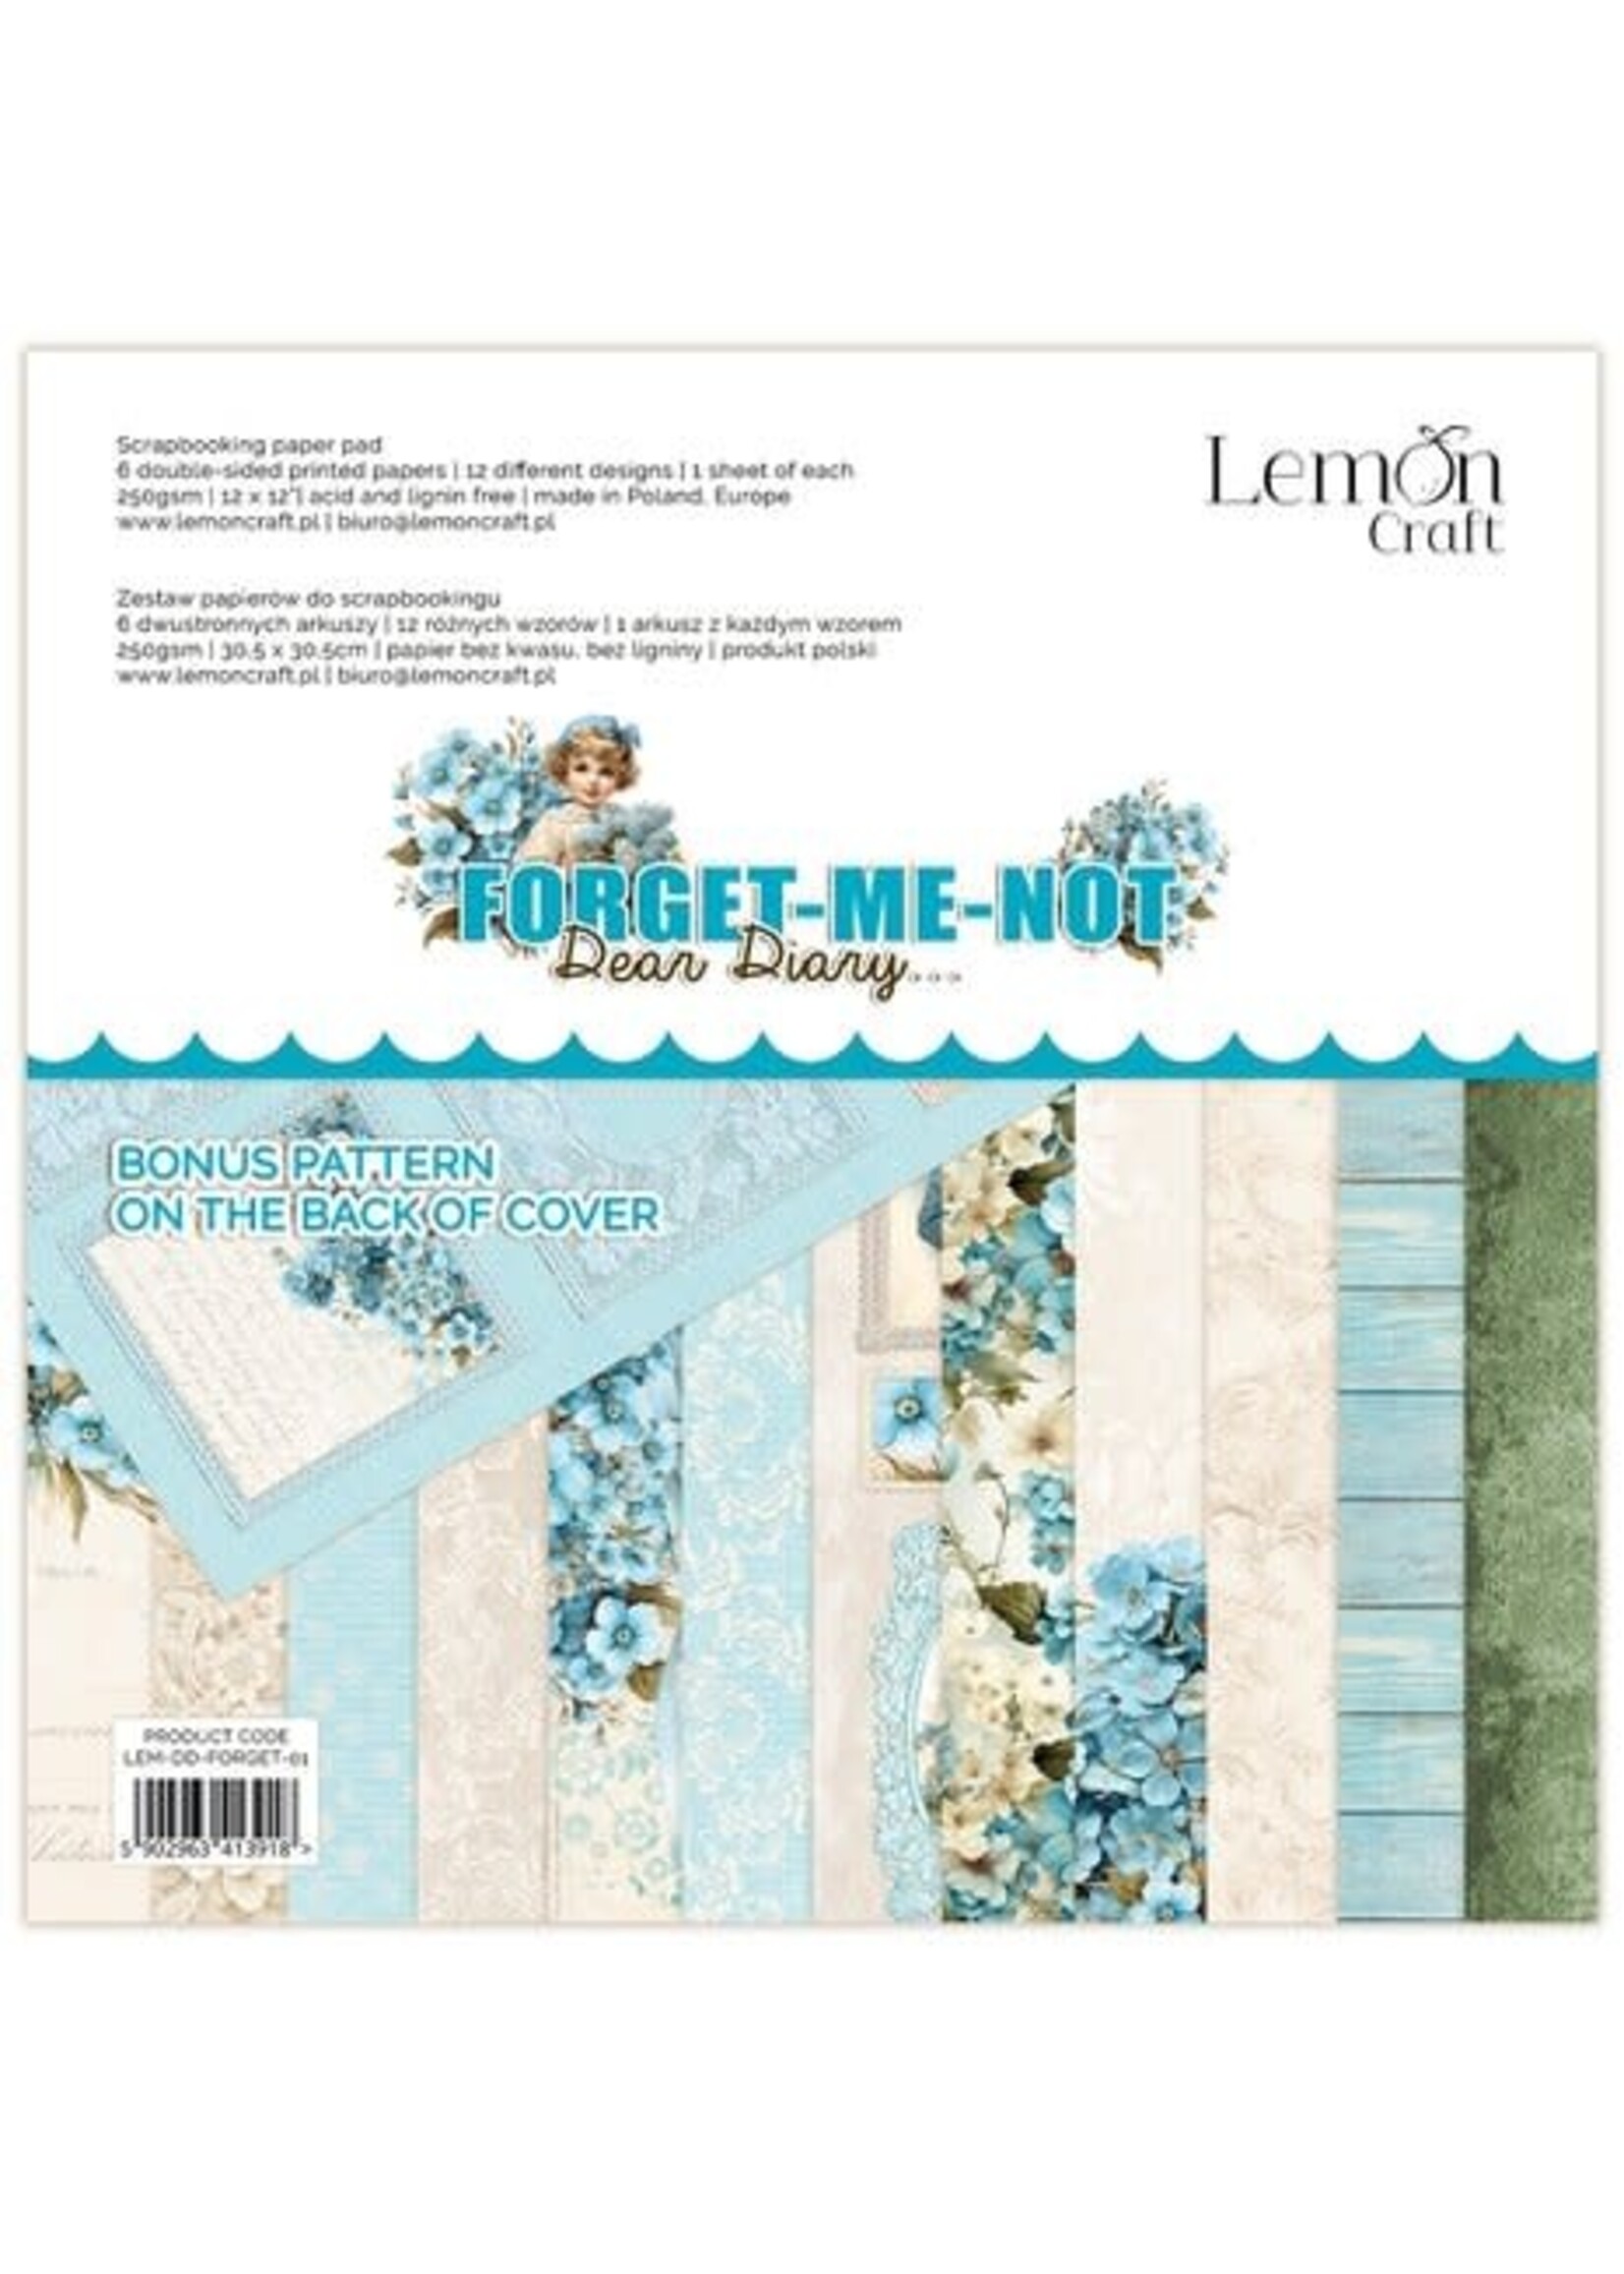 Lemon Craft Dear Diary Forget-Me-Not 12x12 Inch Paper Pad (LEM-DD-FORGET-01)